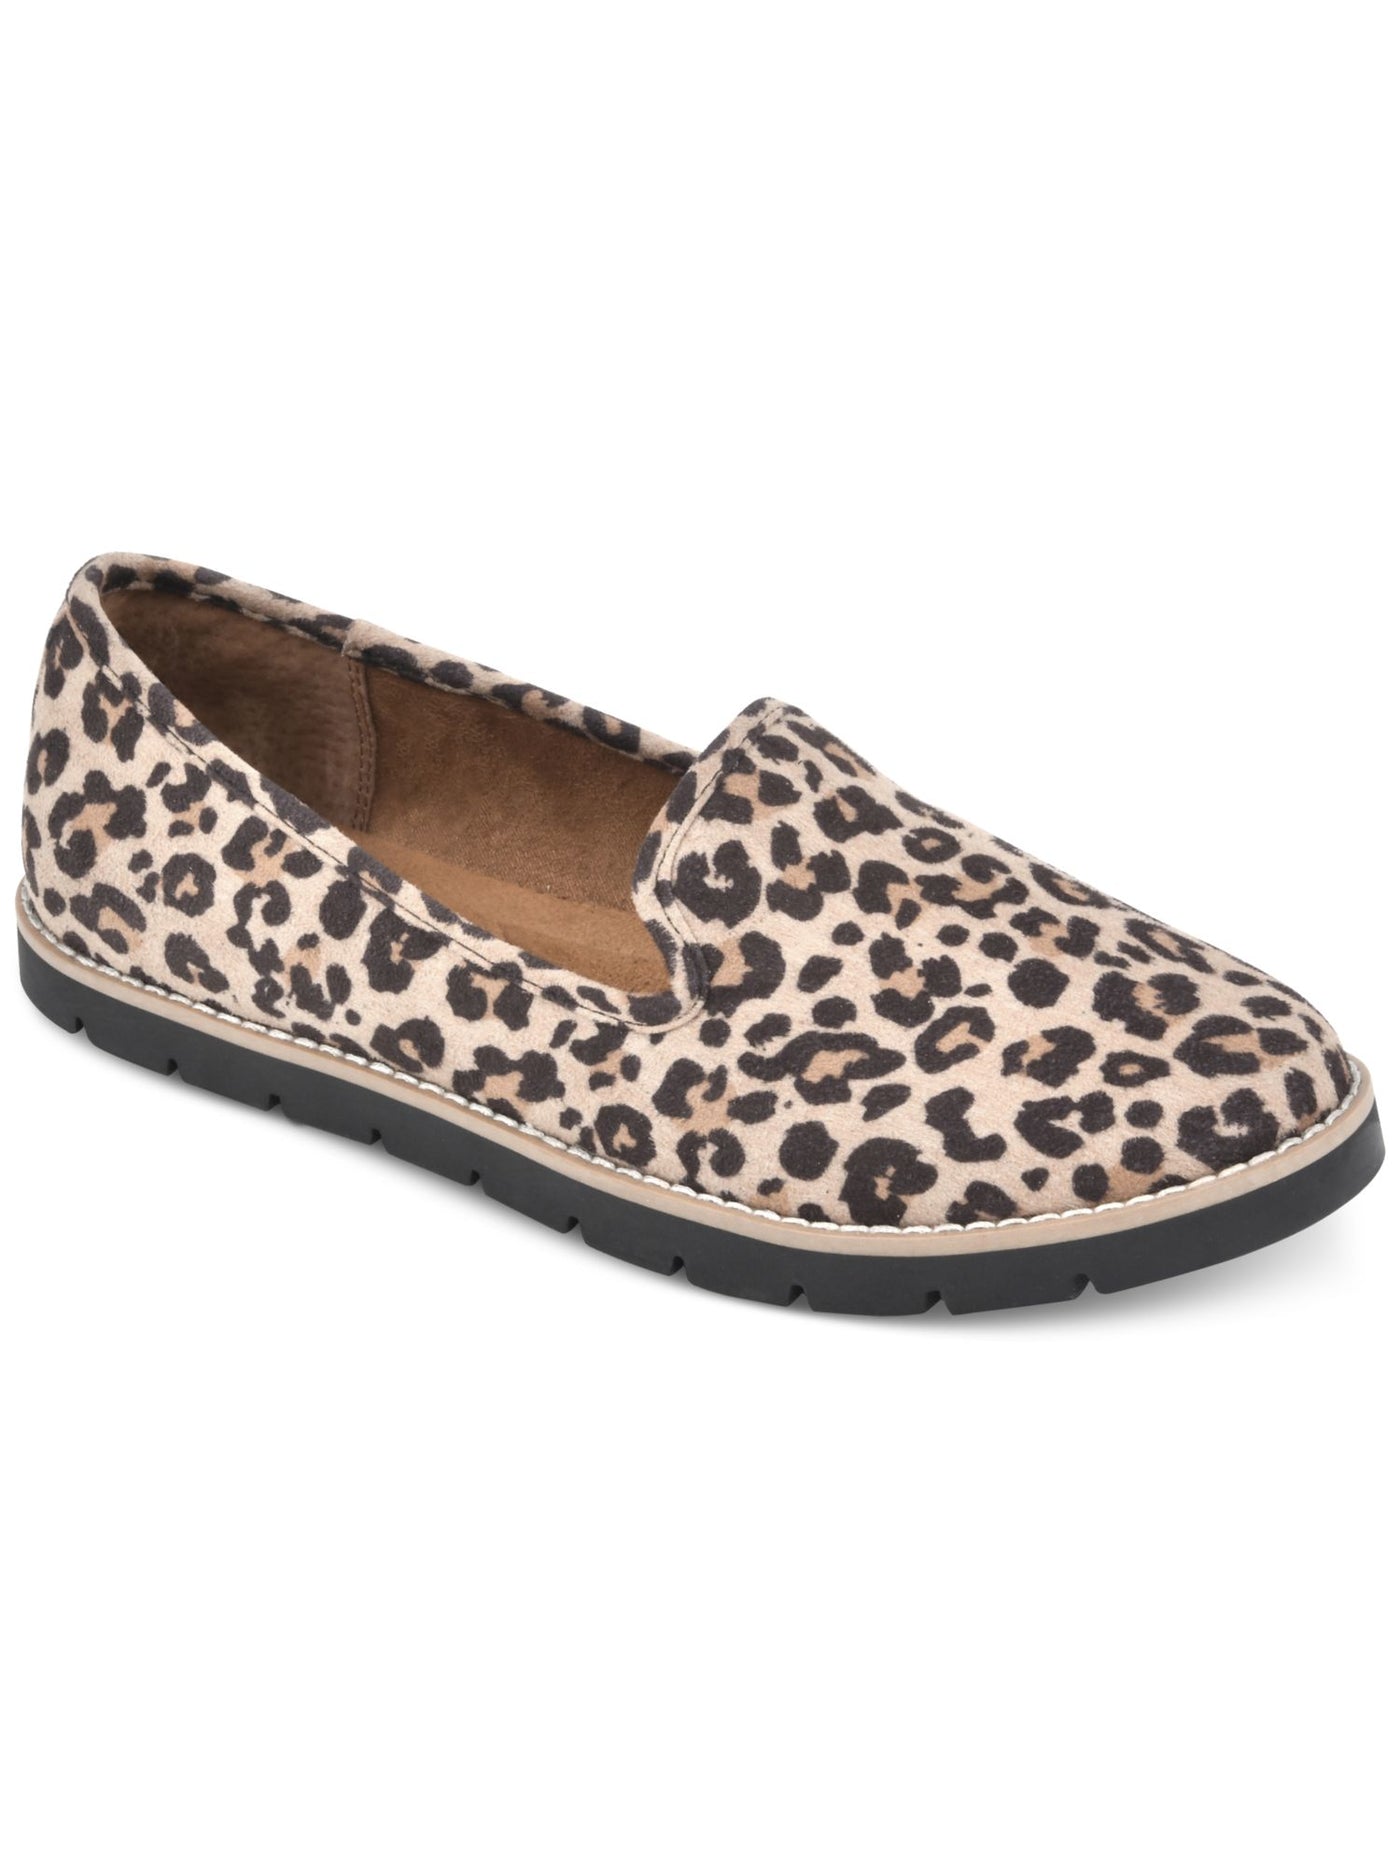 WHITE MOUNTAIN Womens Brown Animal Print Leopard 1/2" Platform Cushioned Denny Round Toe Slip On Loafers Shoes 6.5 M